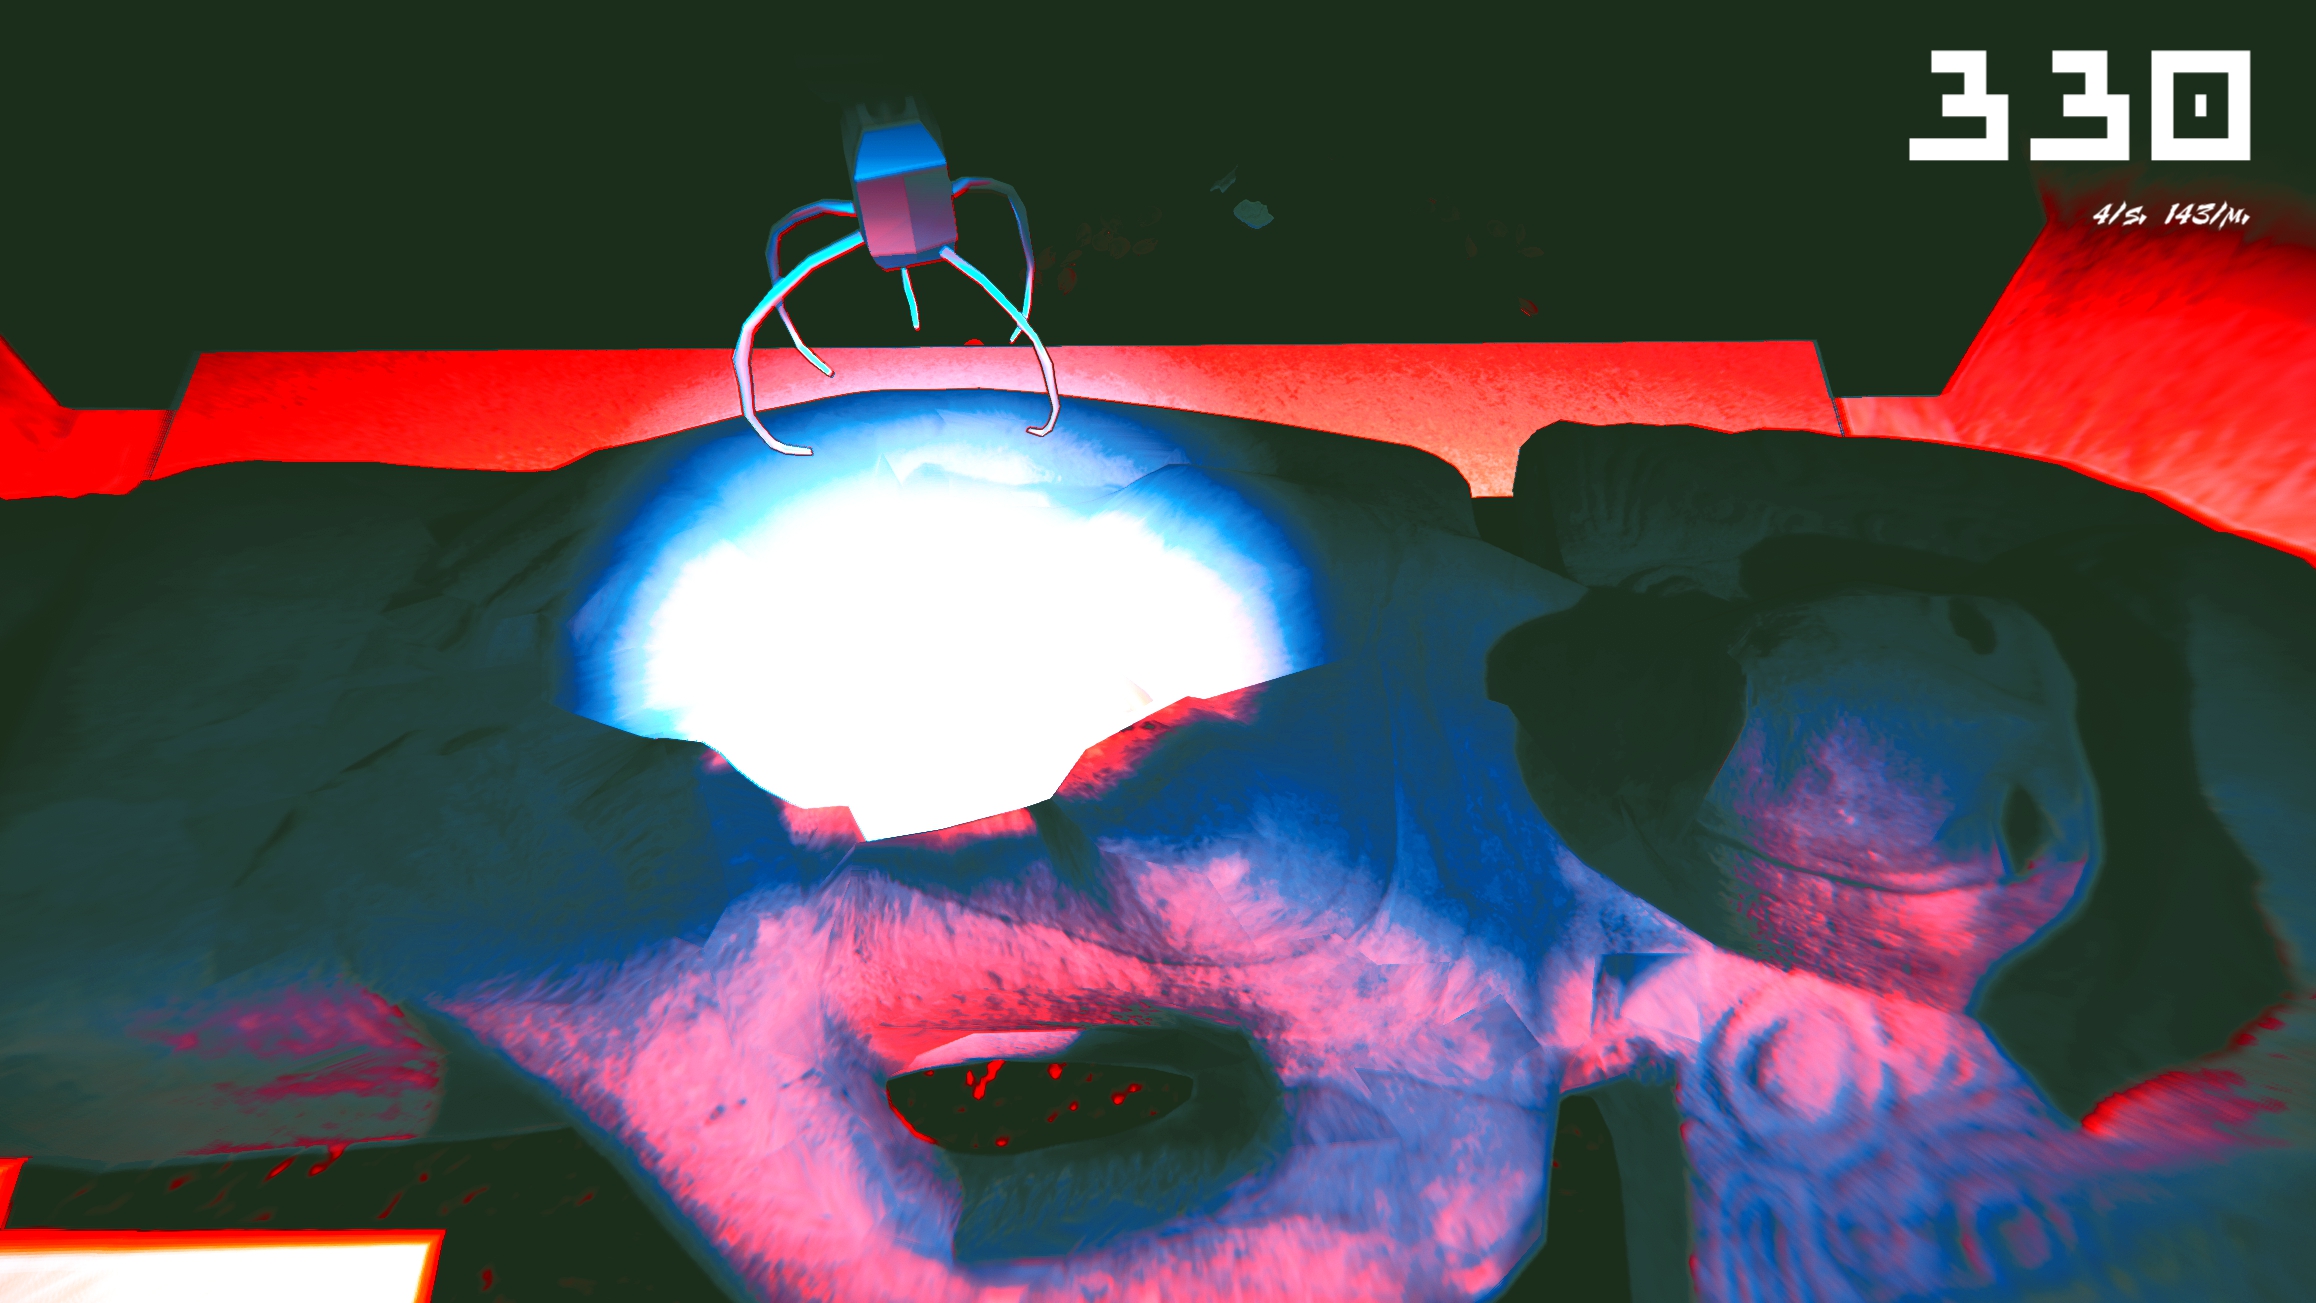 Screenshot from blood broker of a claw machine arm reaching into a ball of blue light